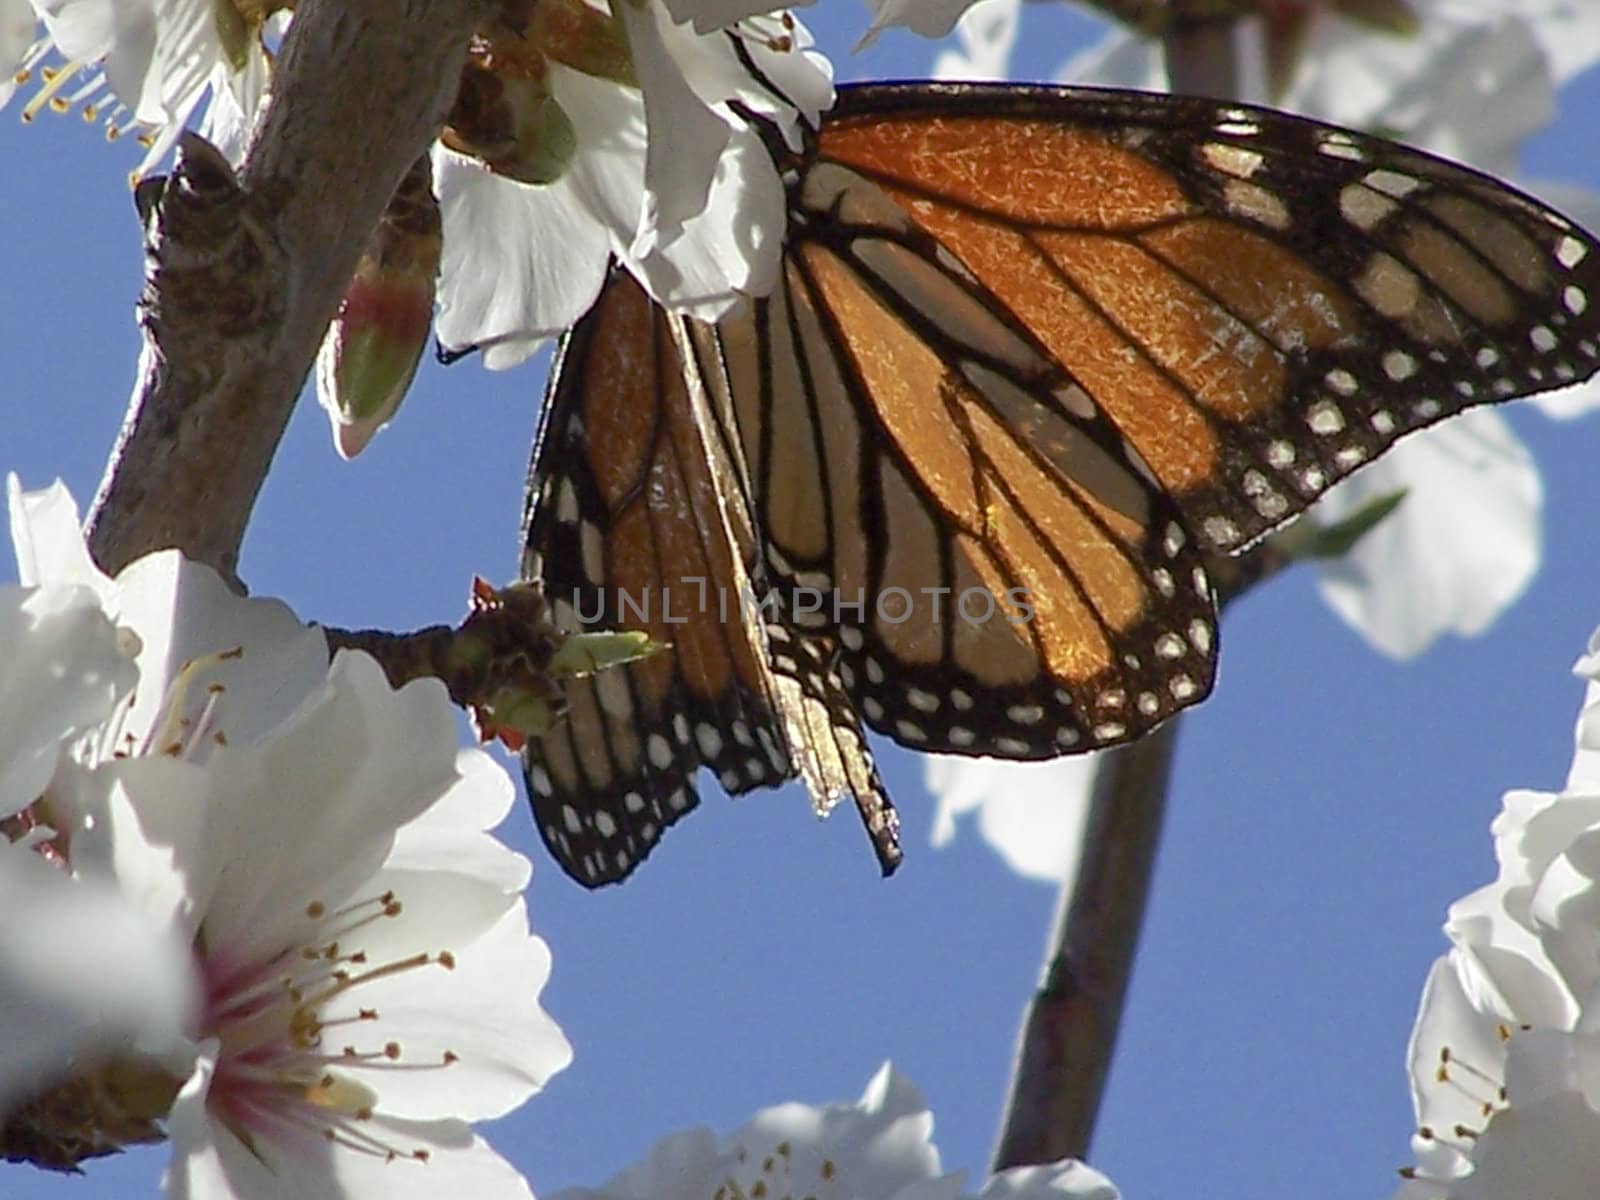  A butterfly lands on some blossom